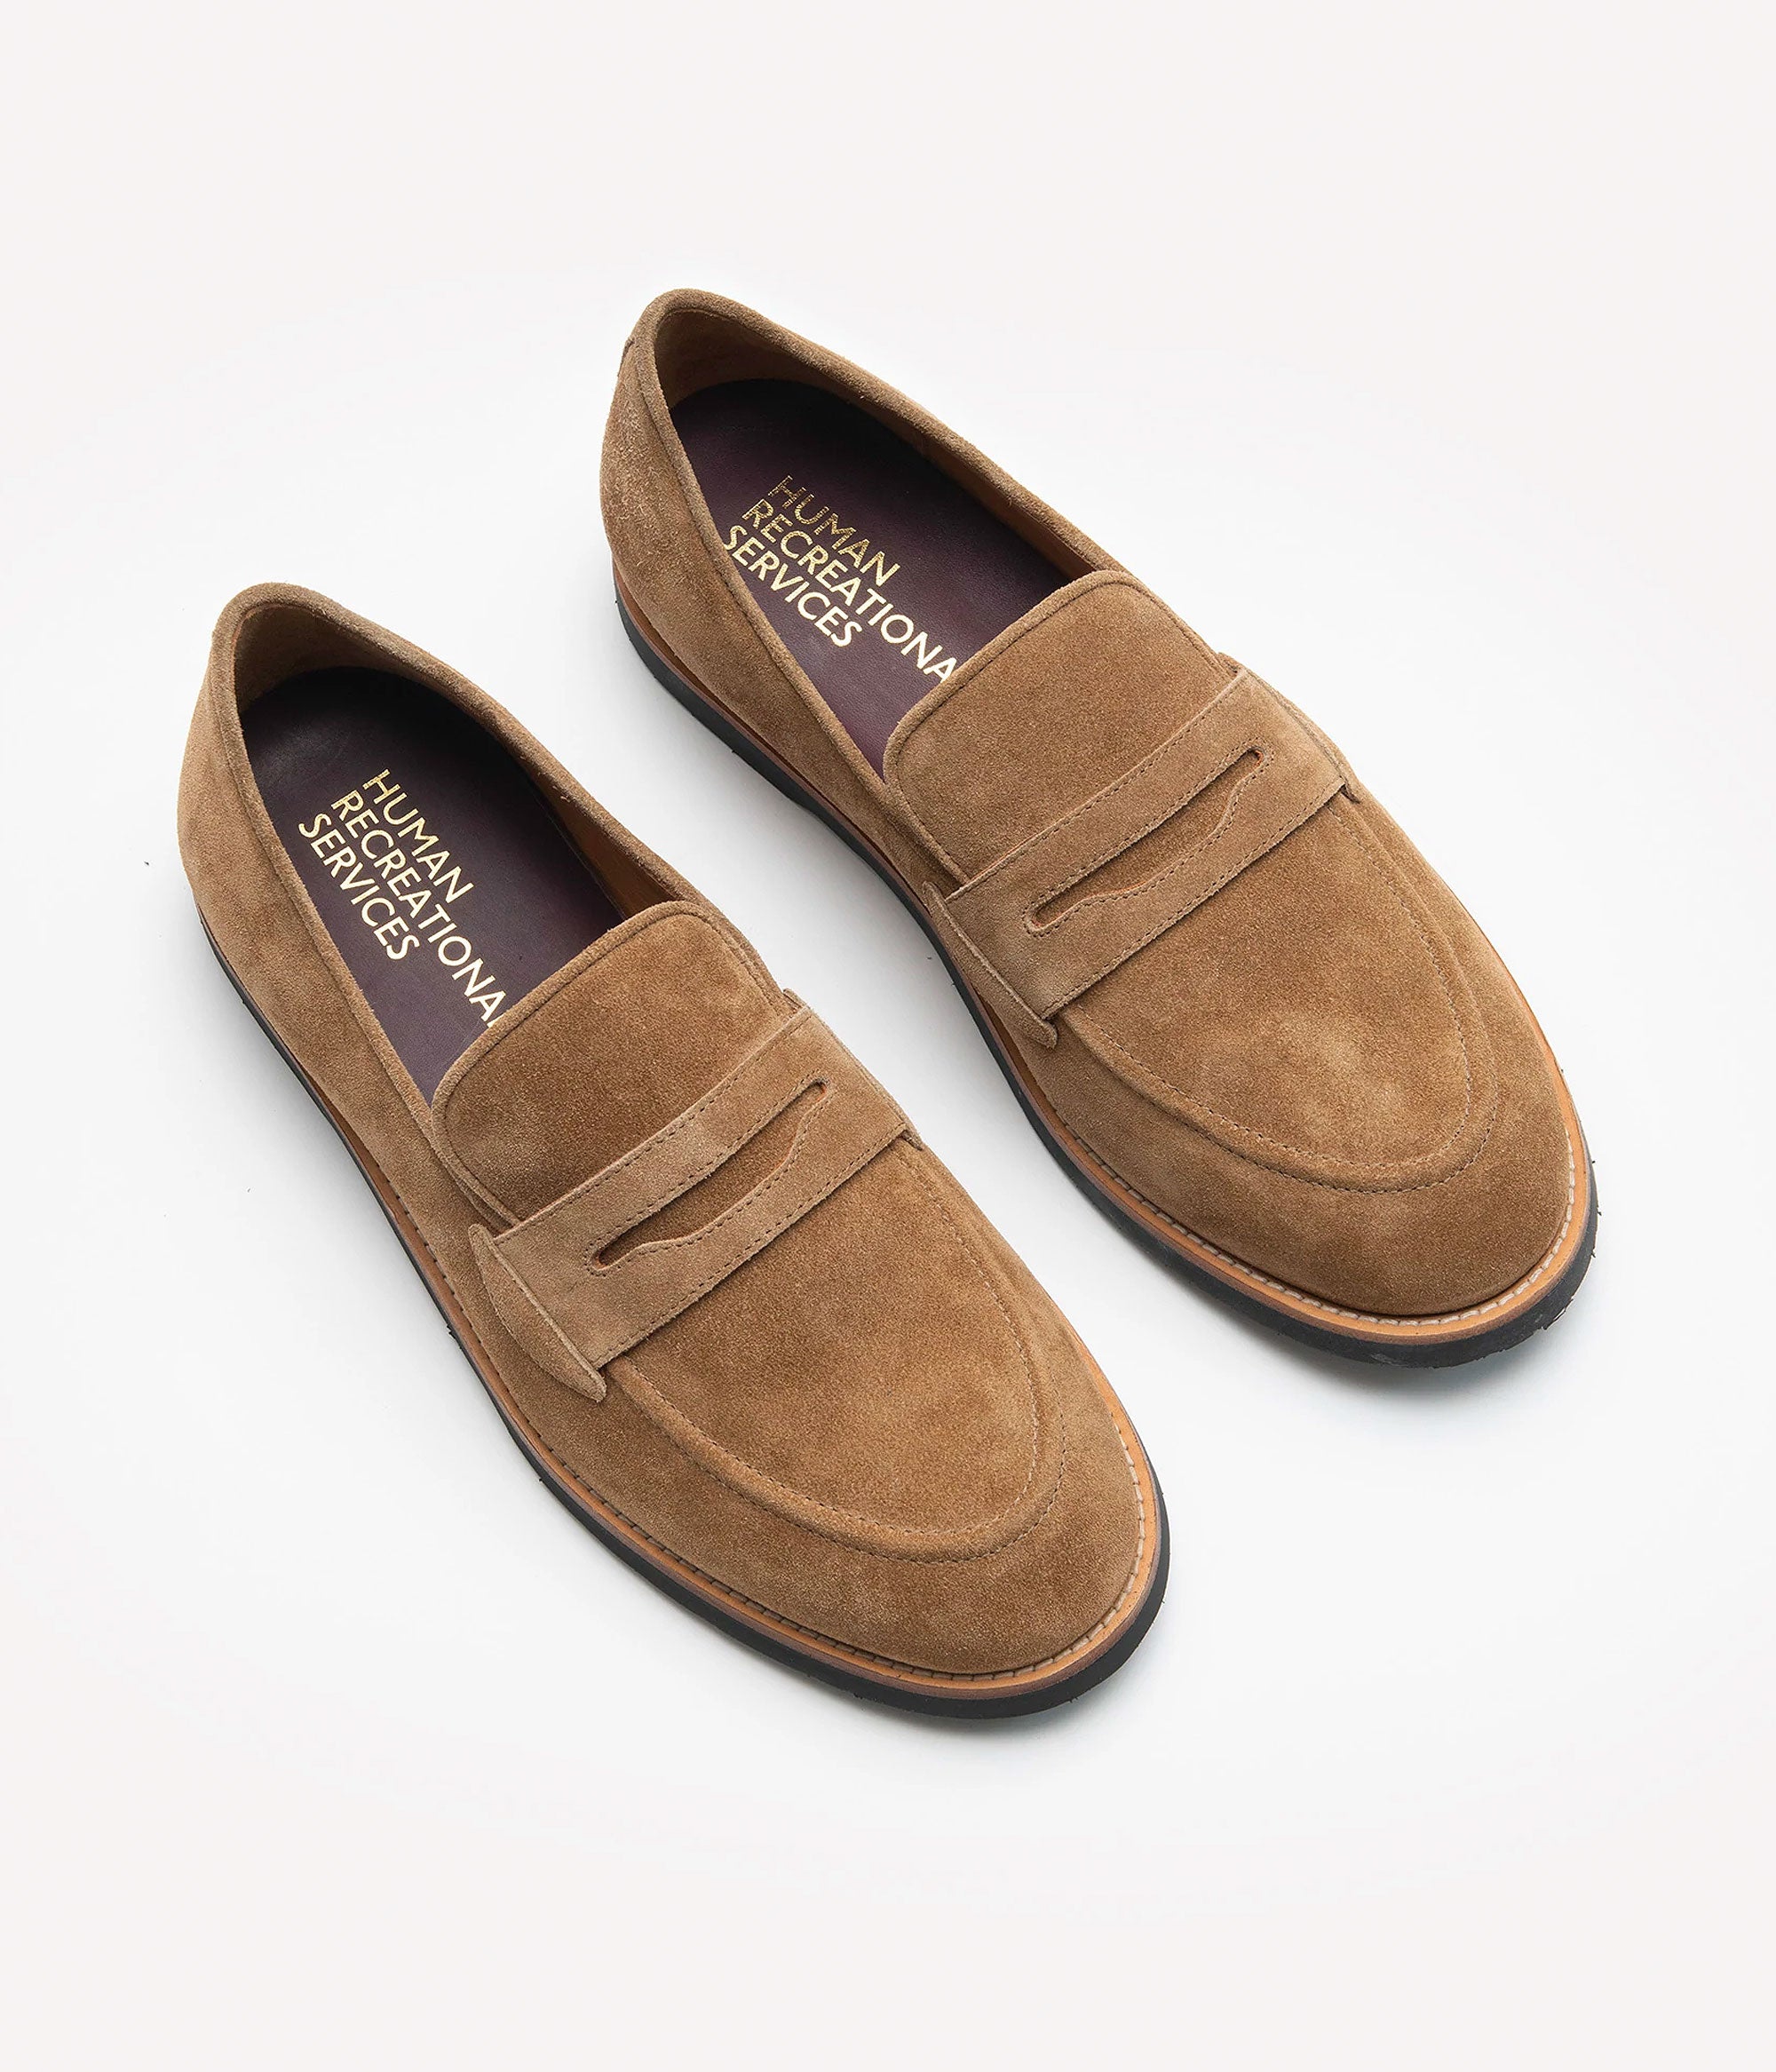 HUMAN RECREATIONAL SERVICES DEL REY PENNY LOAFER IN TUSCAN TAN AND ITALIAN SUEDE 